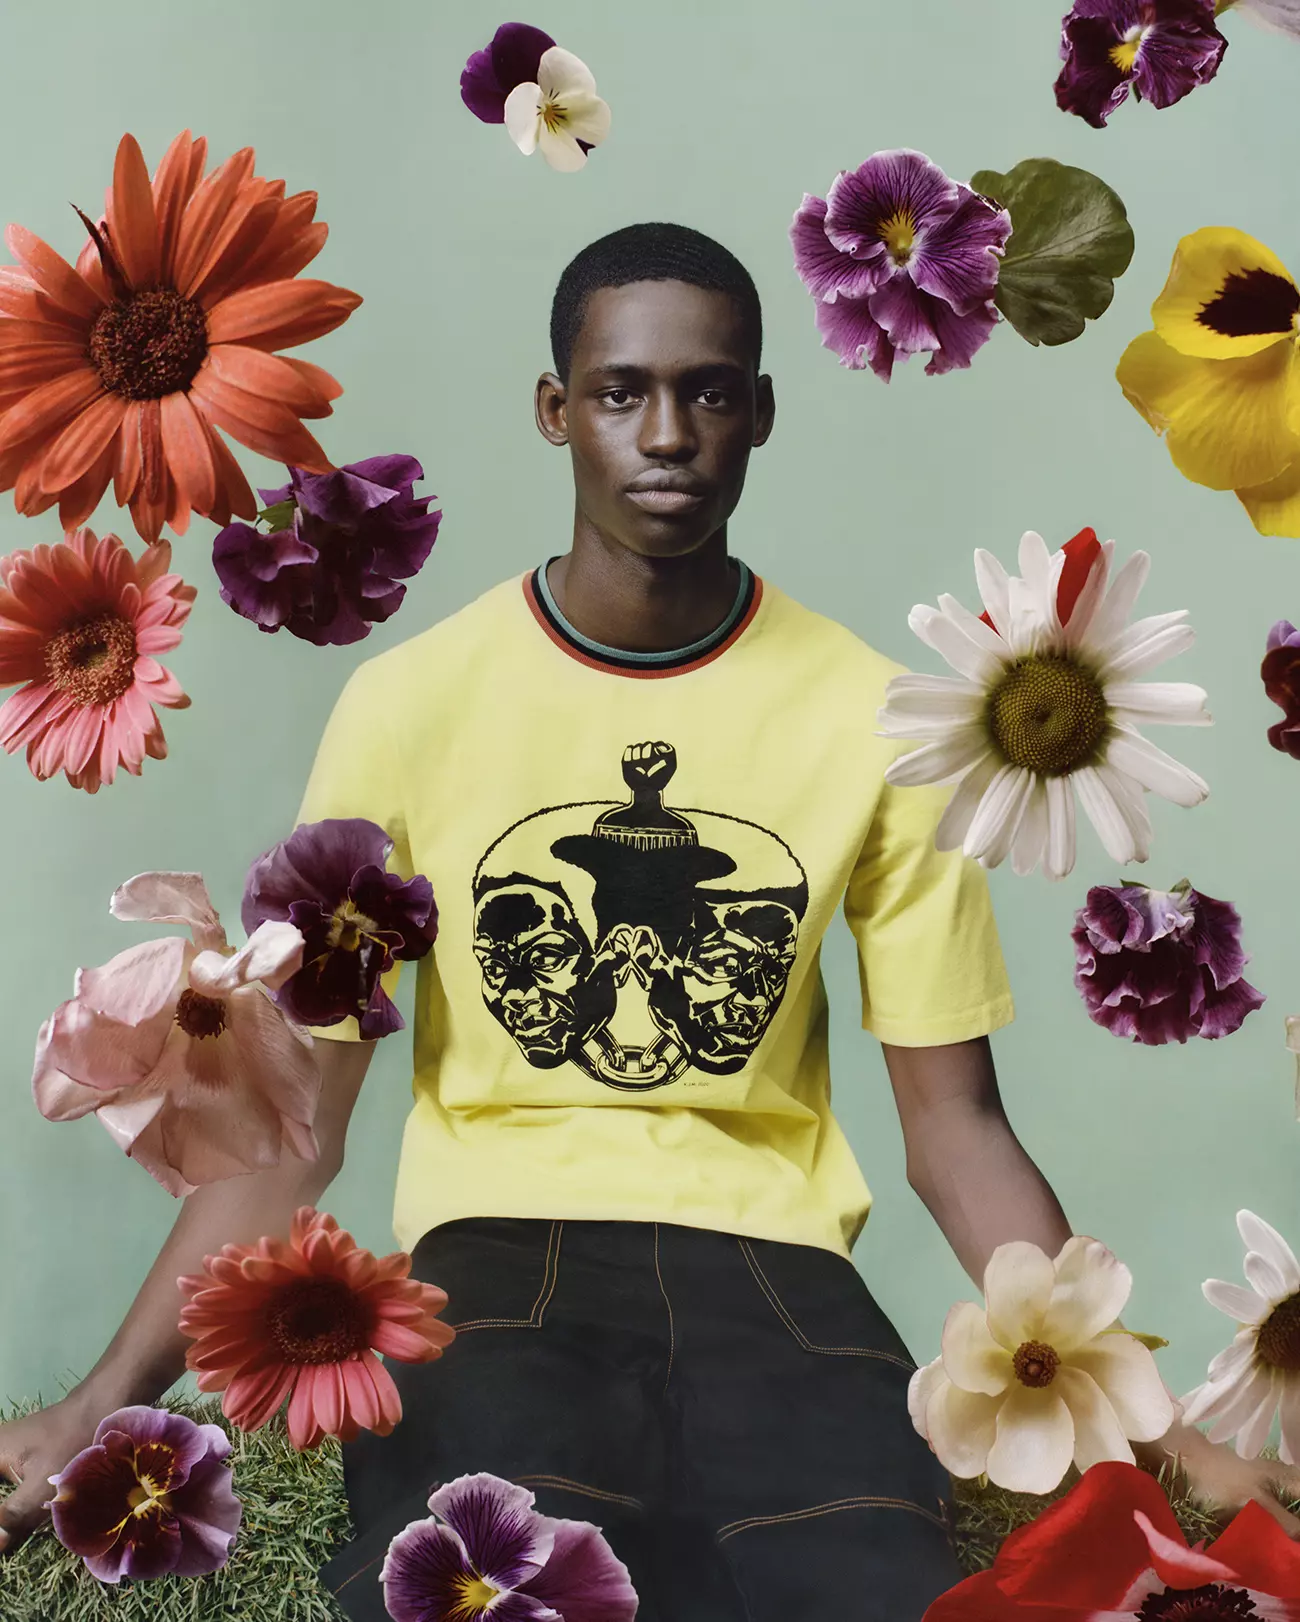 Wales Bonner and Kerry James Marshall join forces for a capsule collection